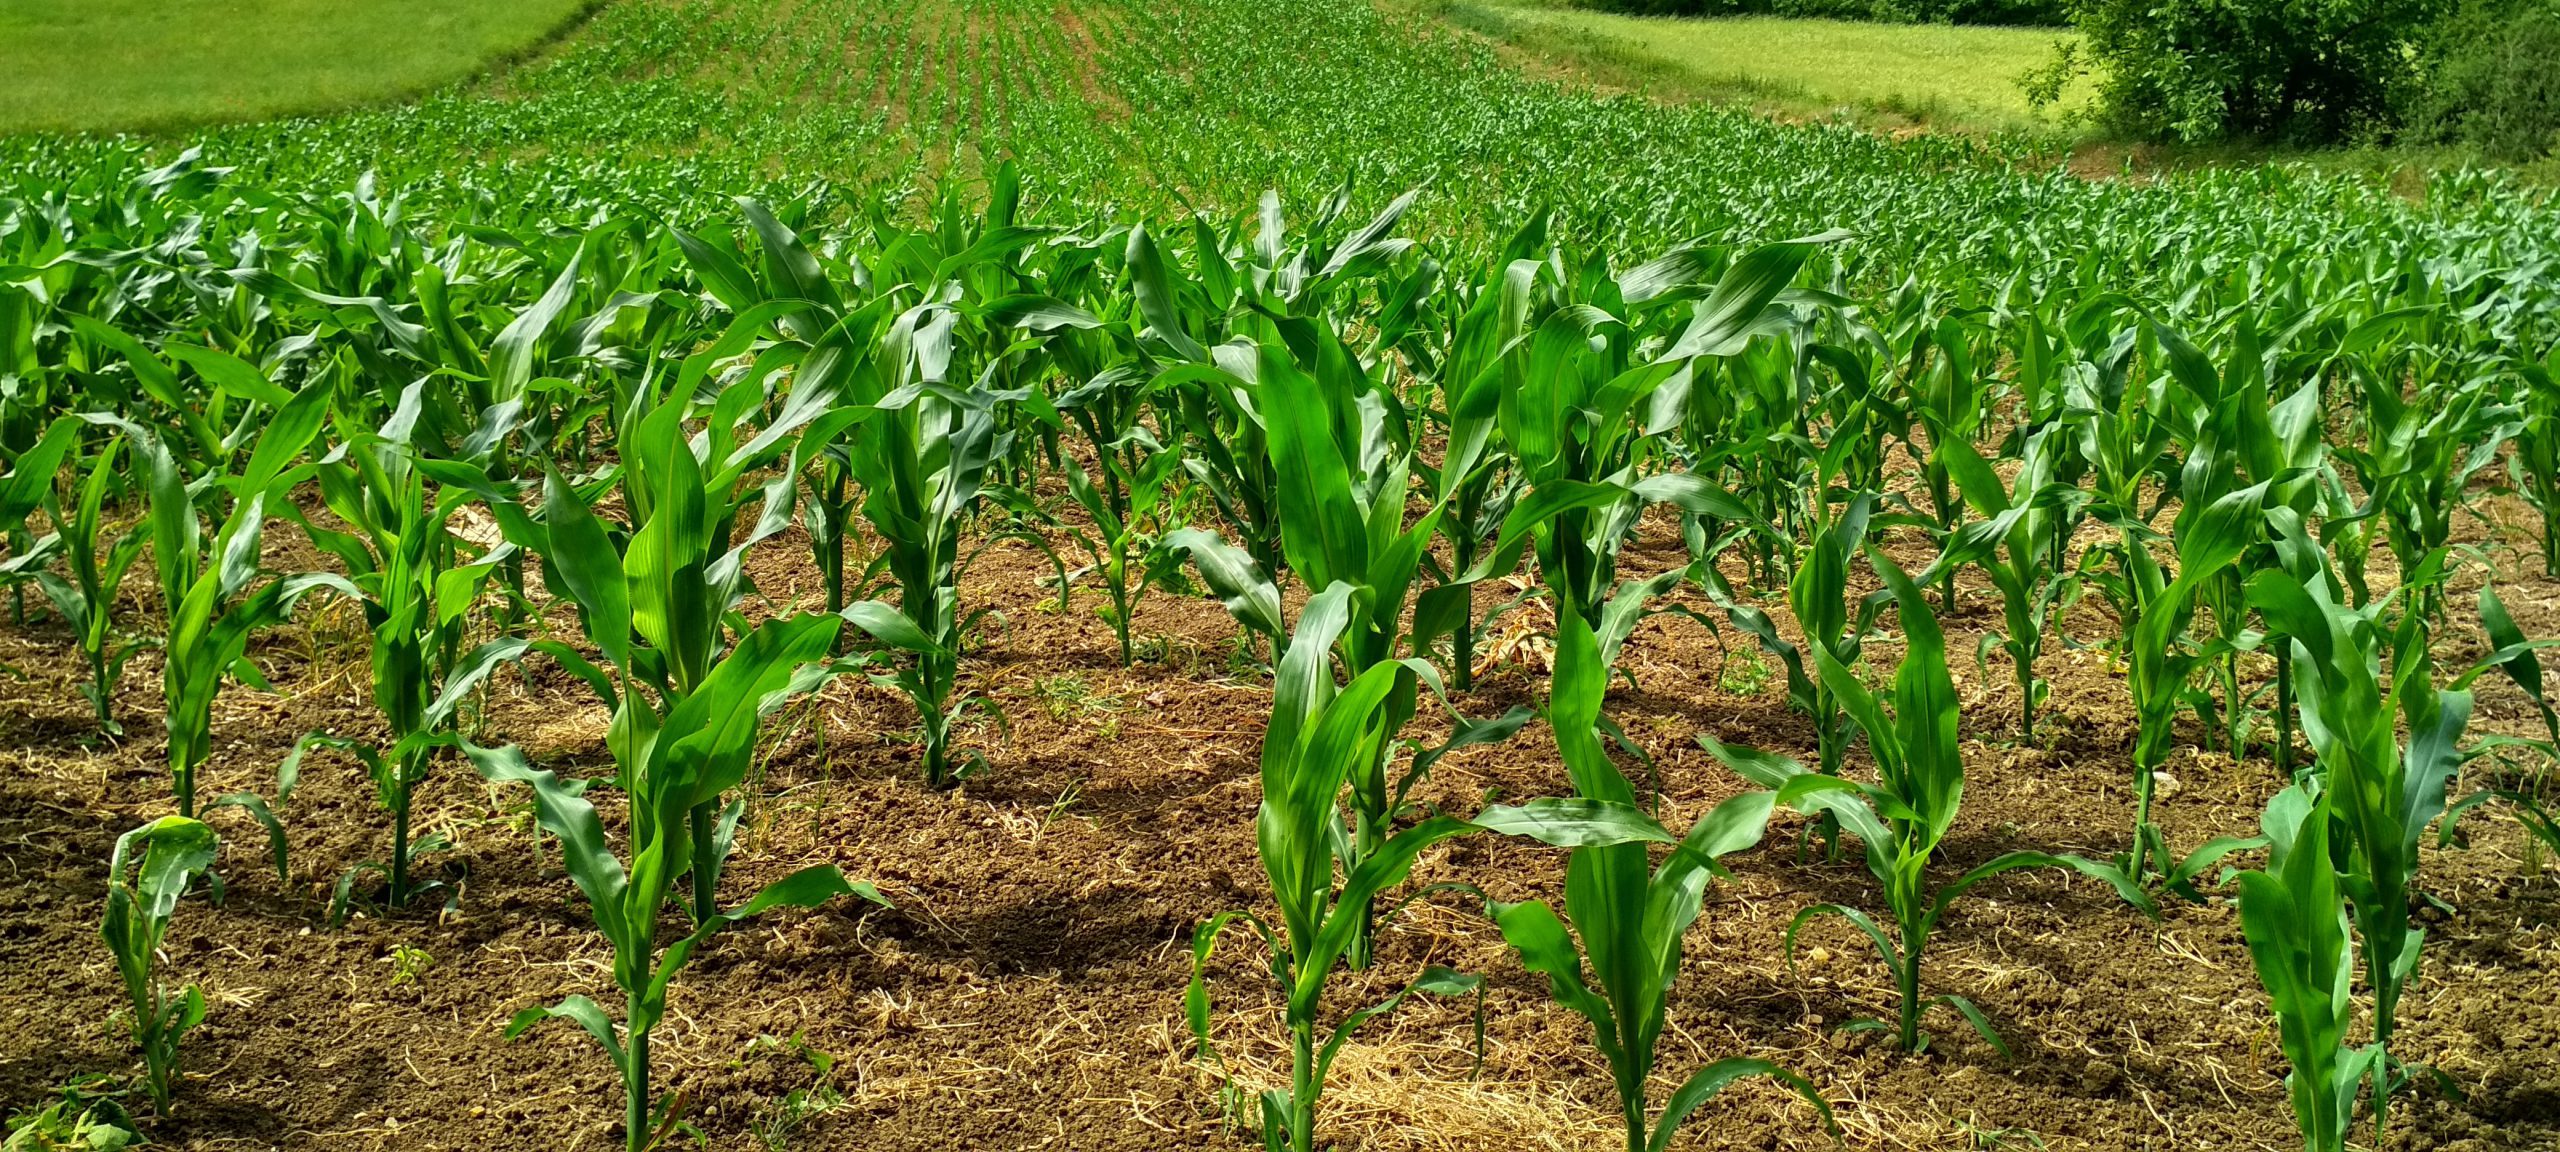 Young Corn Plants in a Field